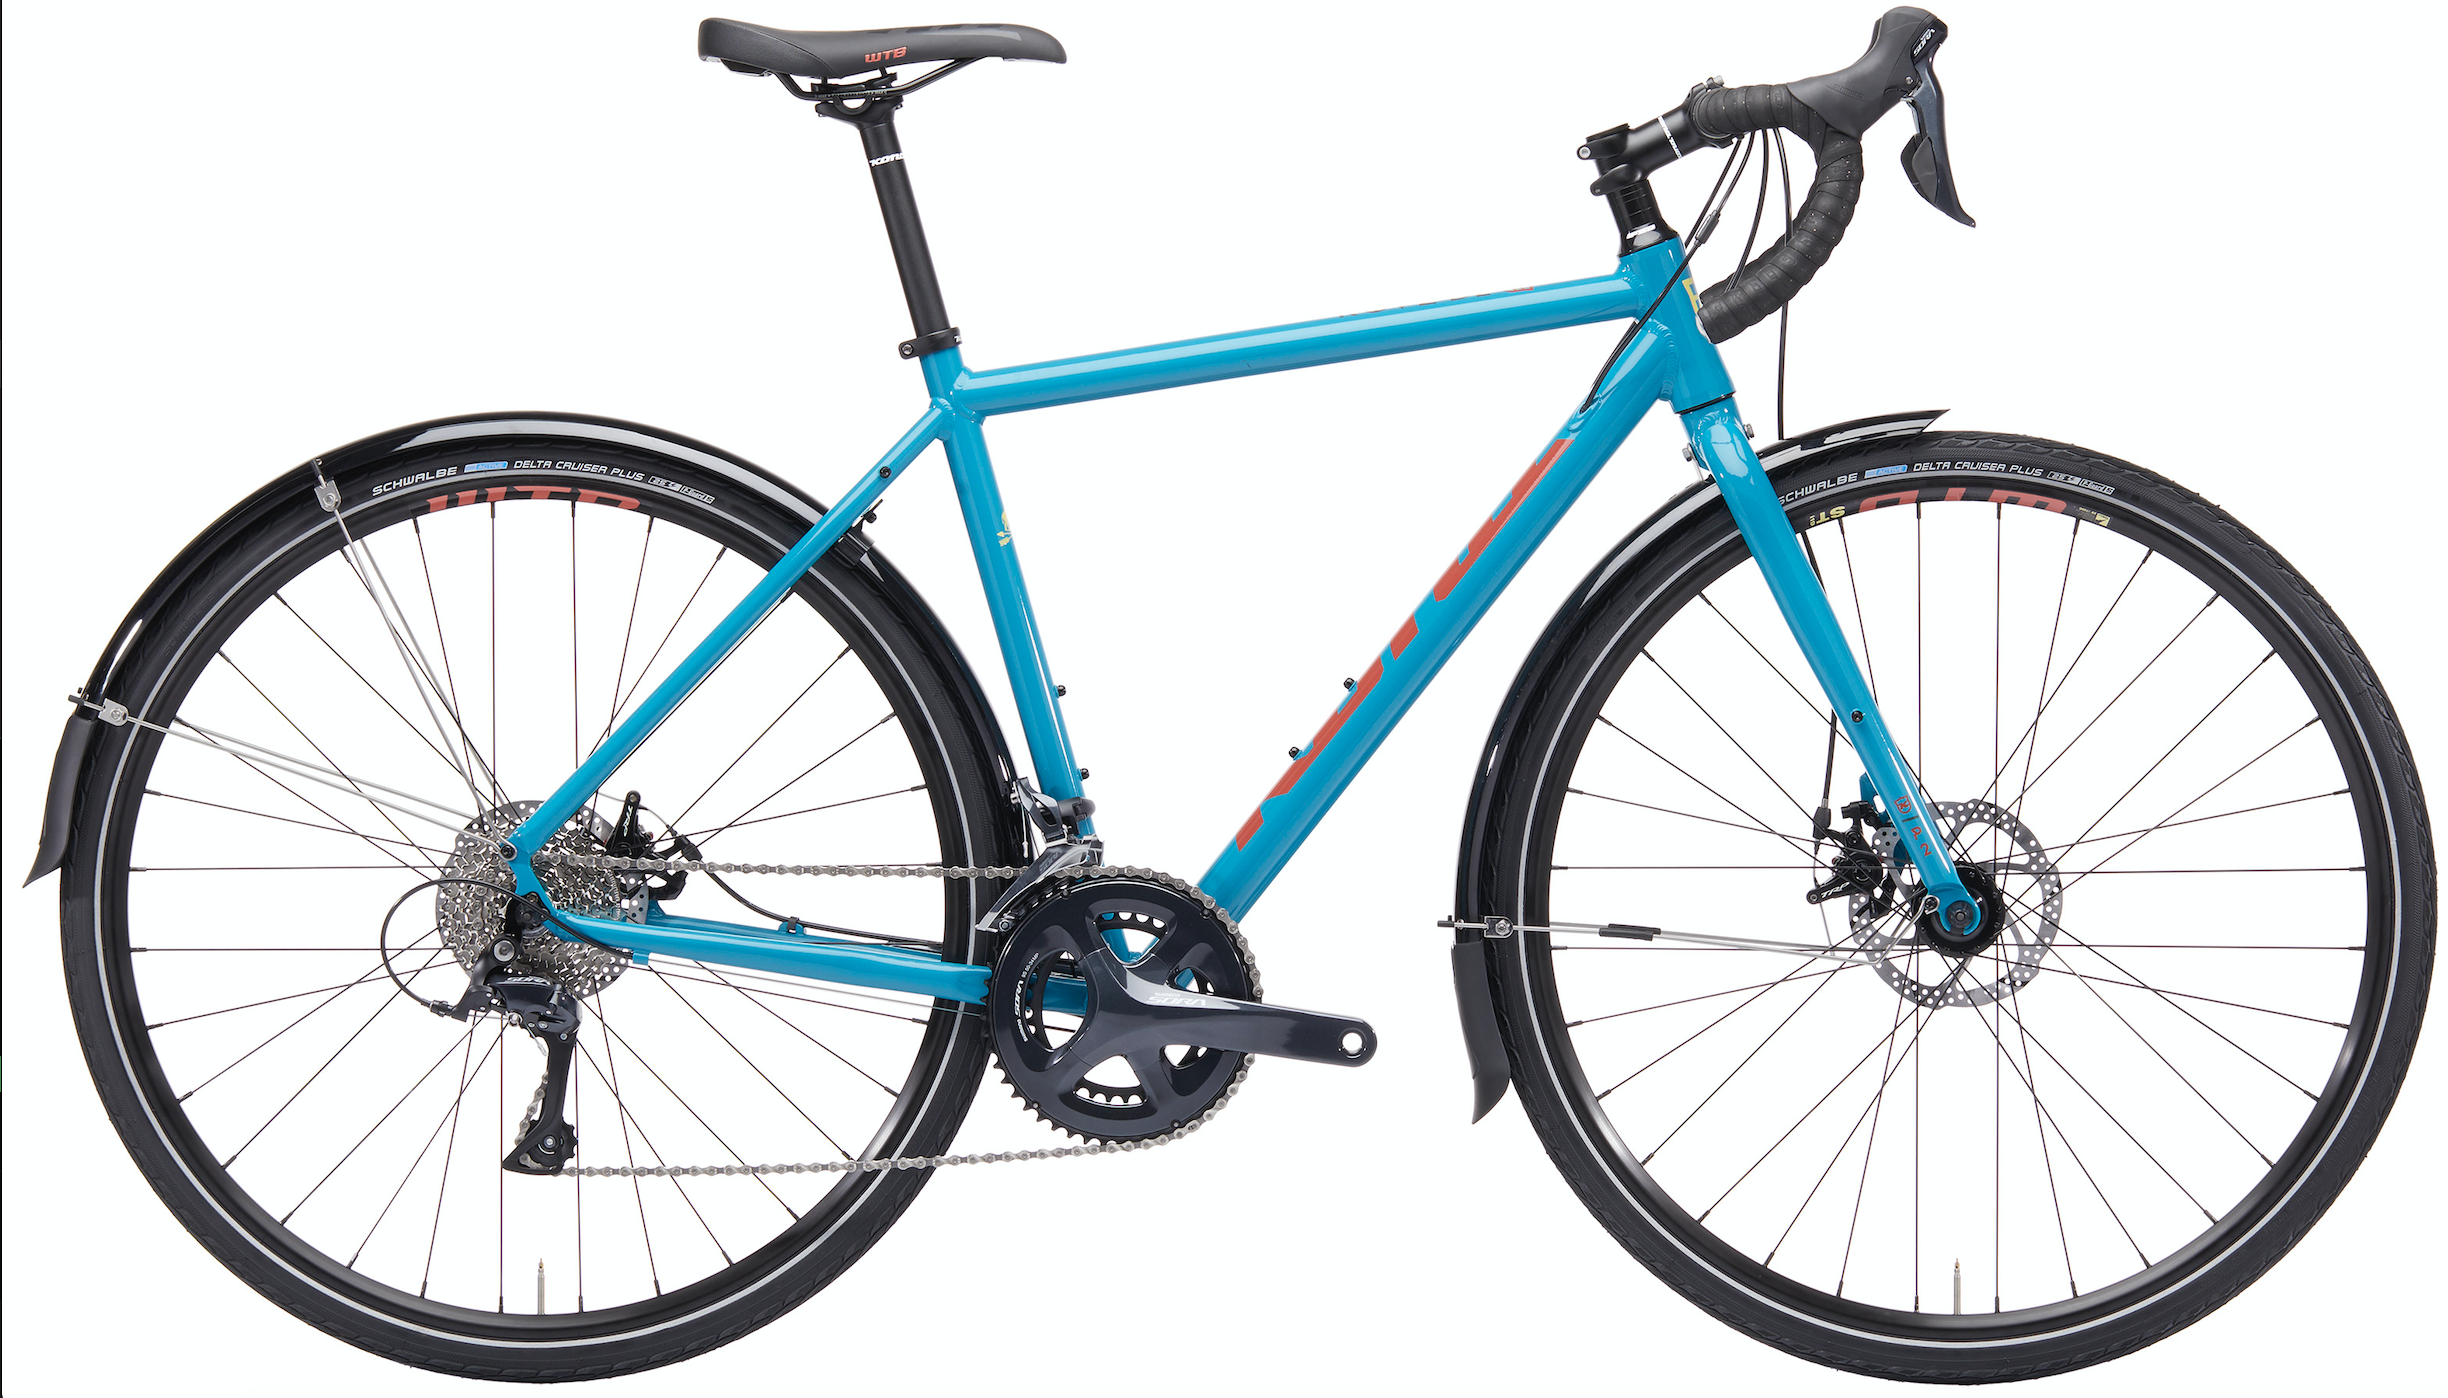 Rove DL Named a Top Commuter Choice for Price in Road.CC